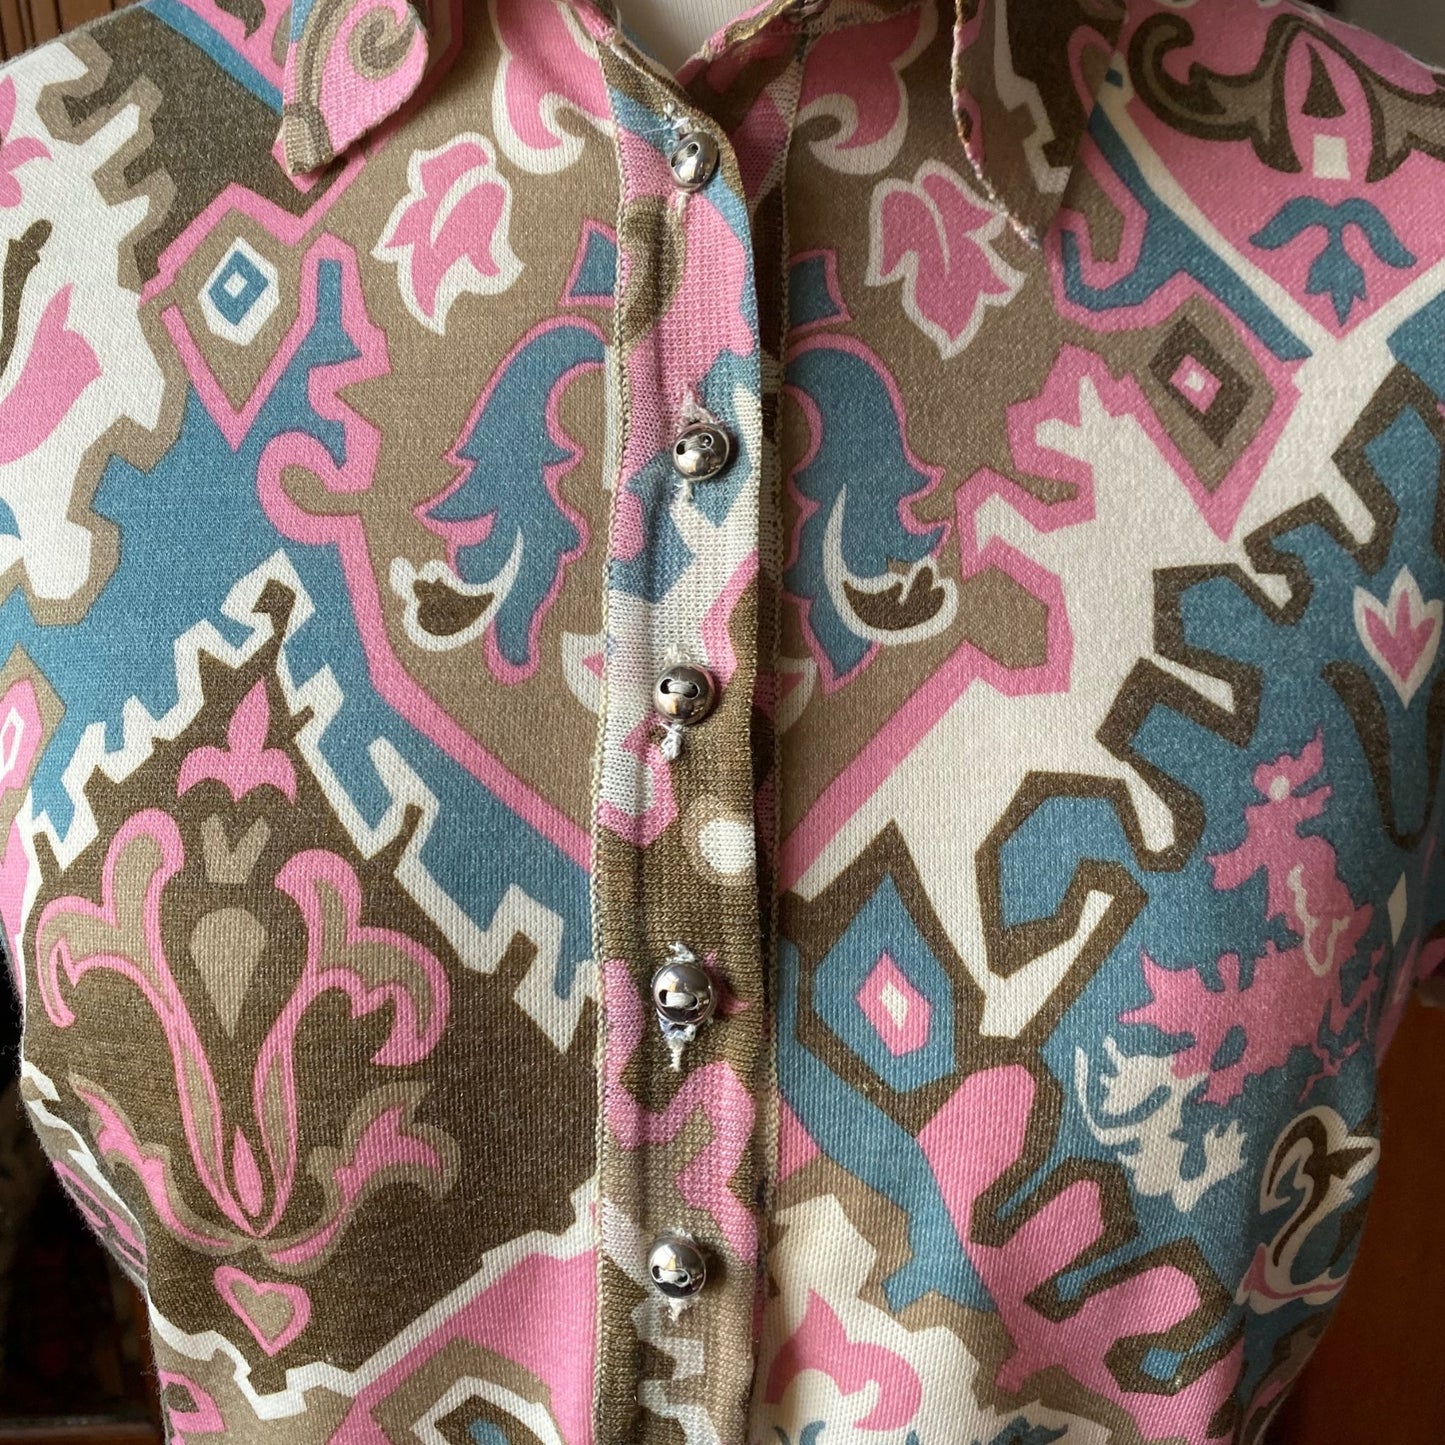 Vintage 60s Psychedelic Print Blue, Brown, Pink, and White Collared Scooter Dress  Approx UK size 12-14